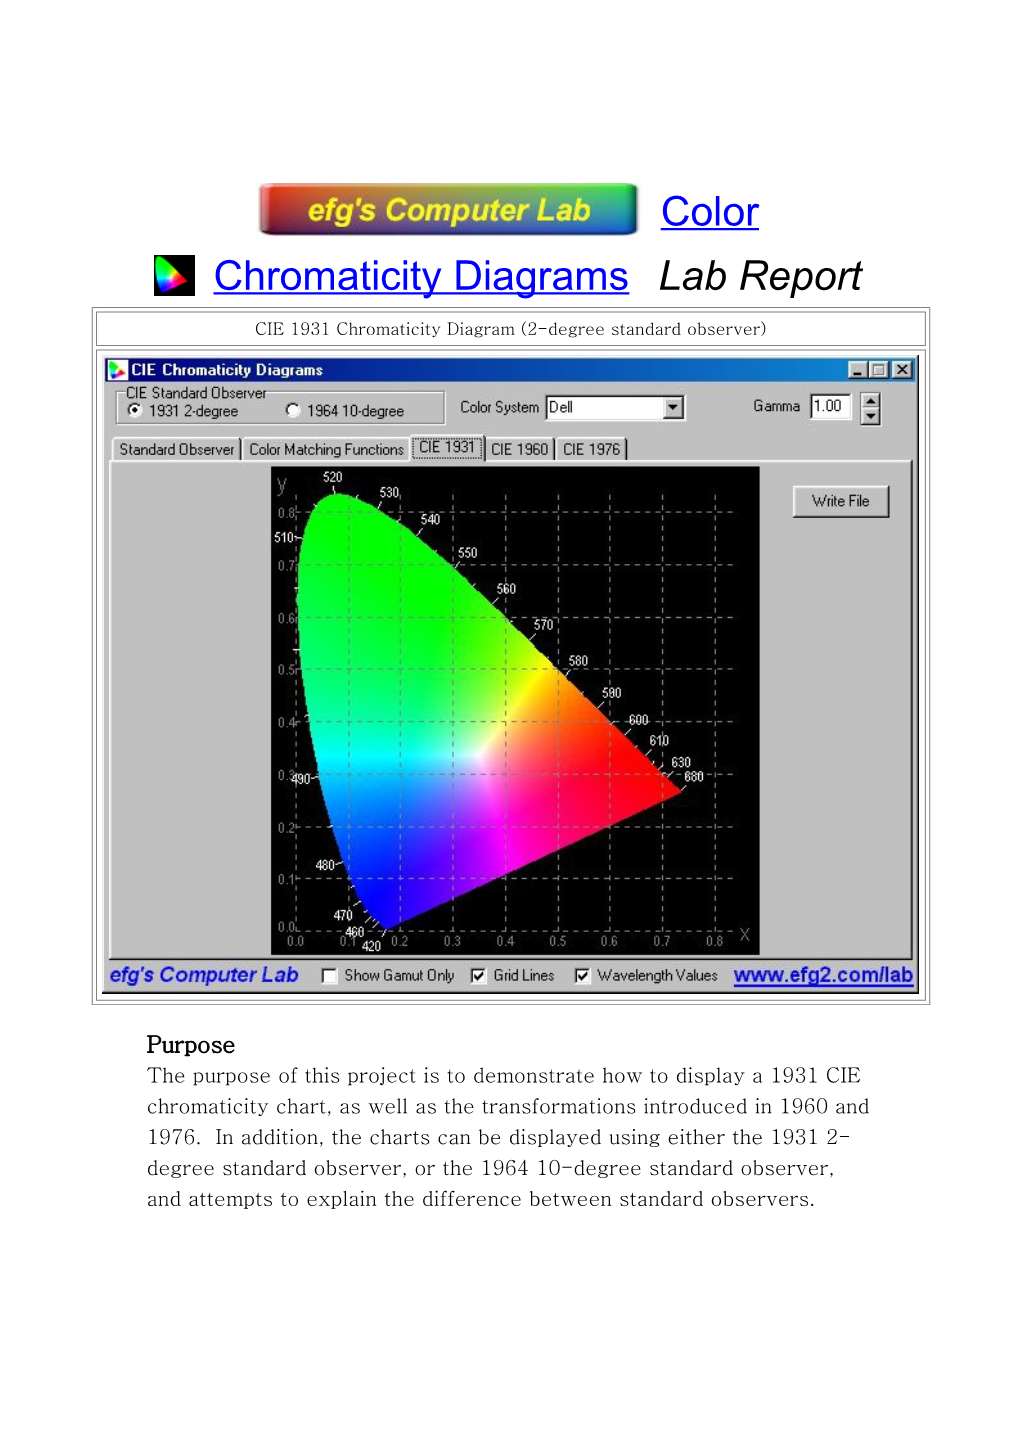 Purpose the Purpose of This Project Is to Demonstrate How to Display a 1931 CIE Chromaticity